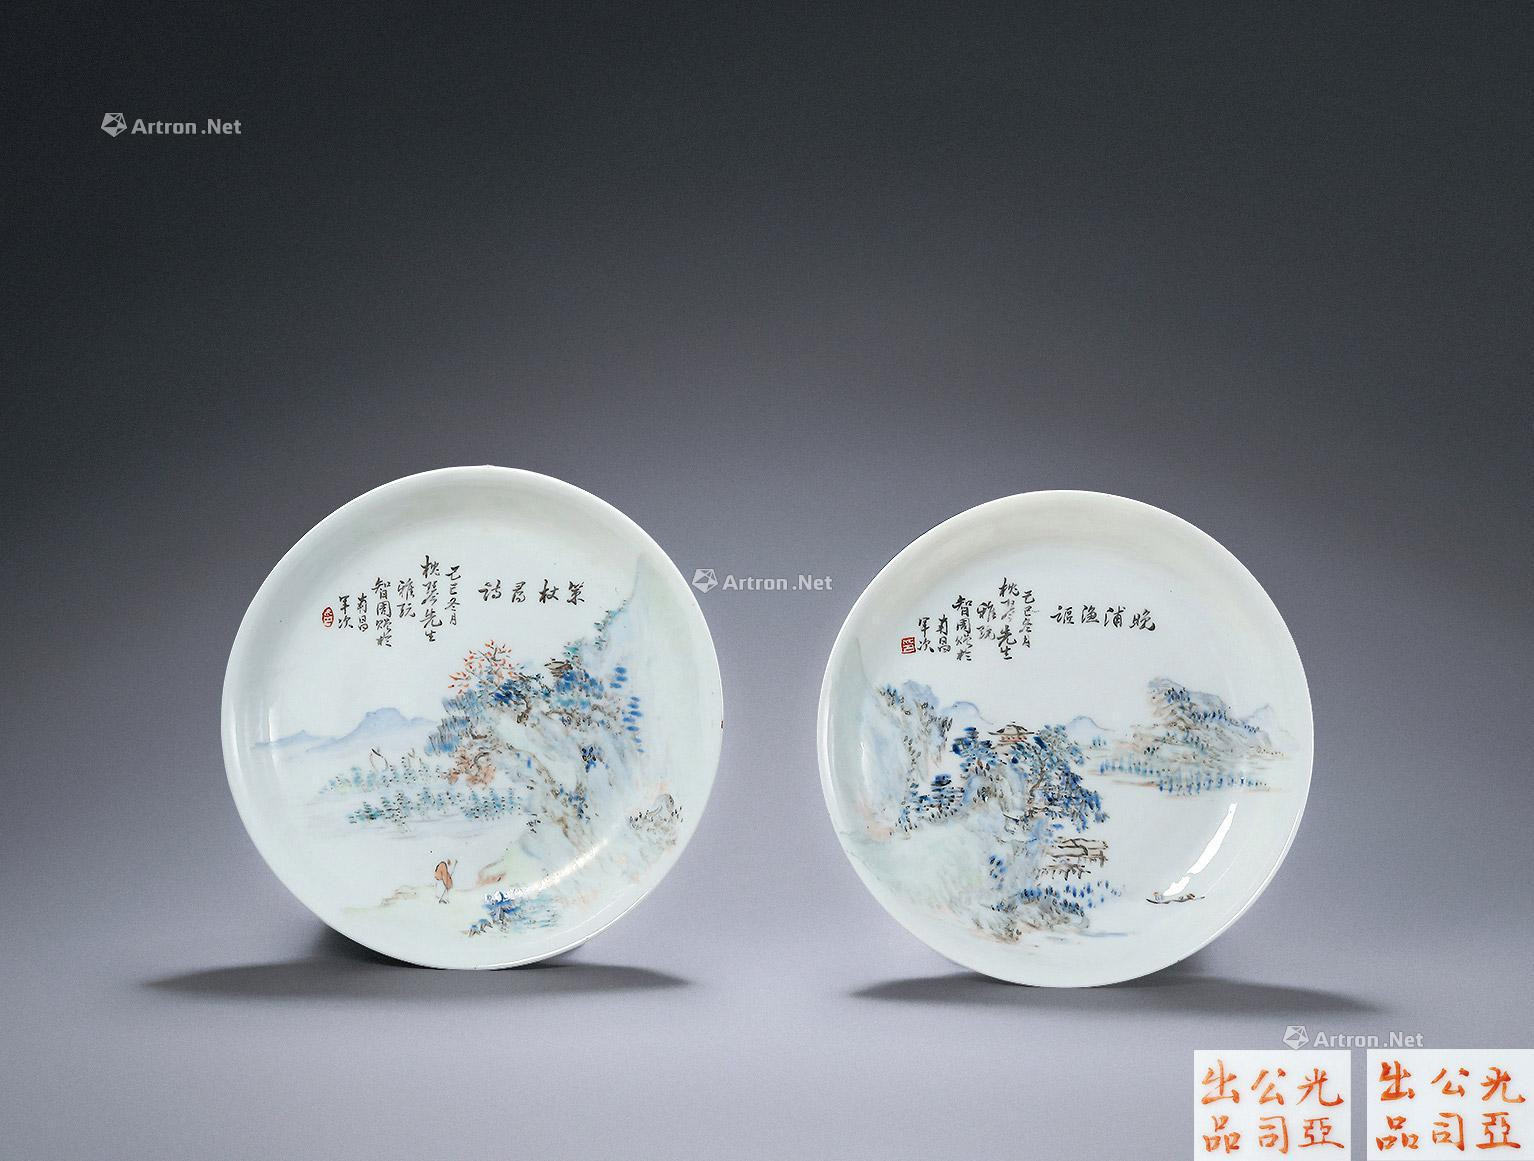 A PAIR OF QIANJIANG CAI LANDSCAPE AND FIGURES PLATES